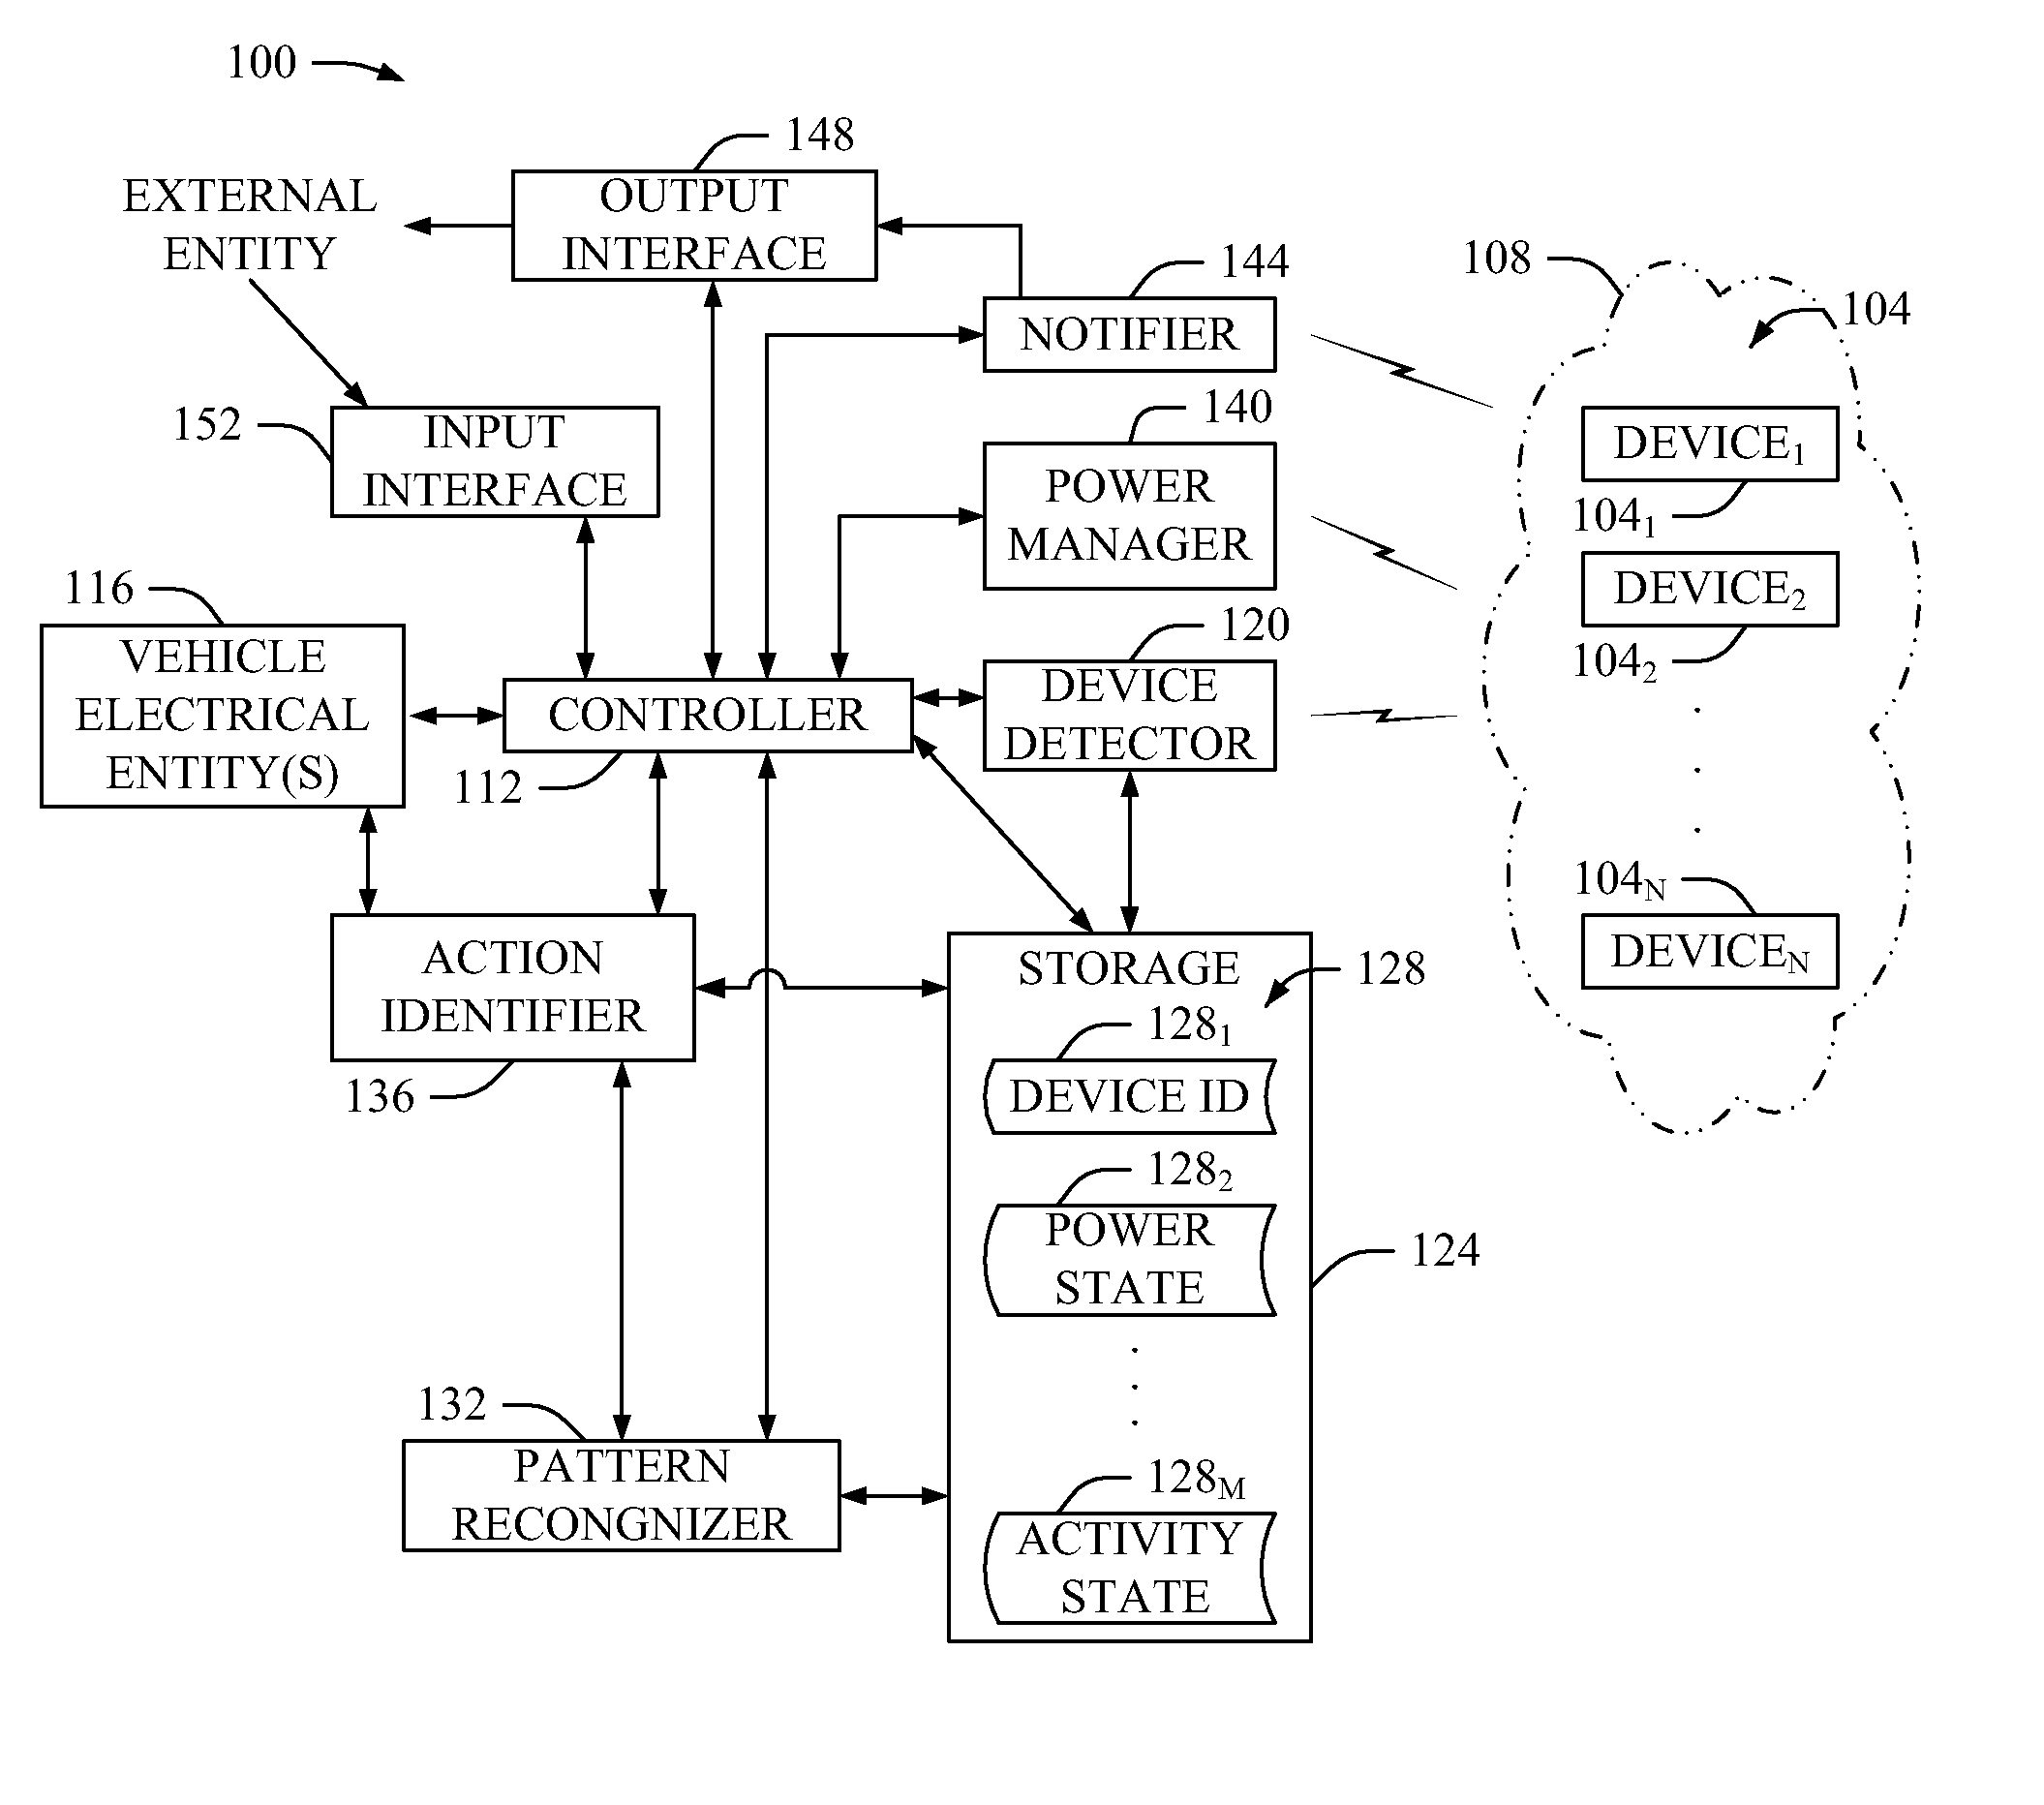 Managing electrical device power state